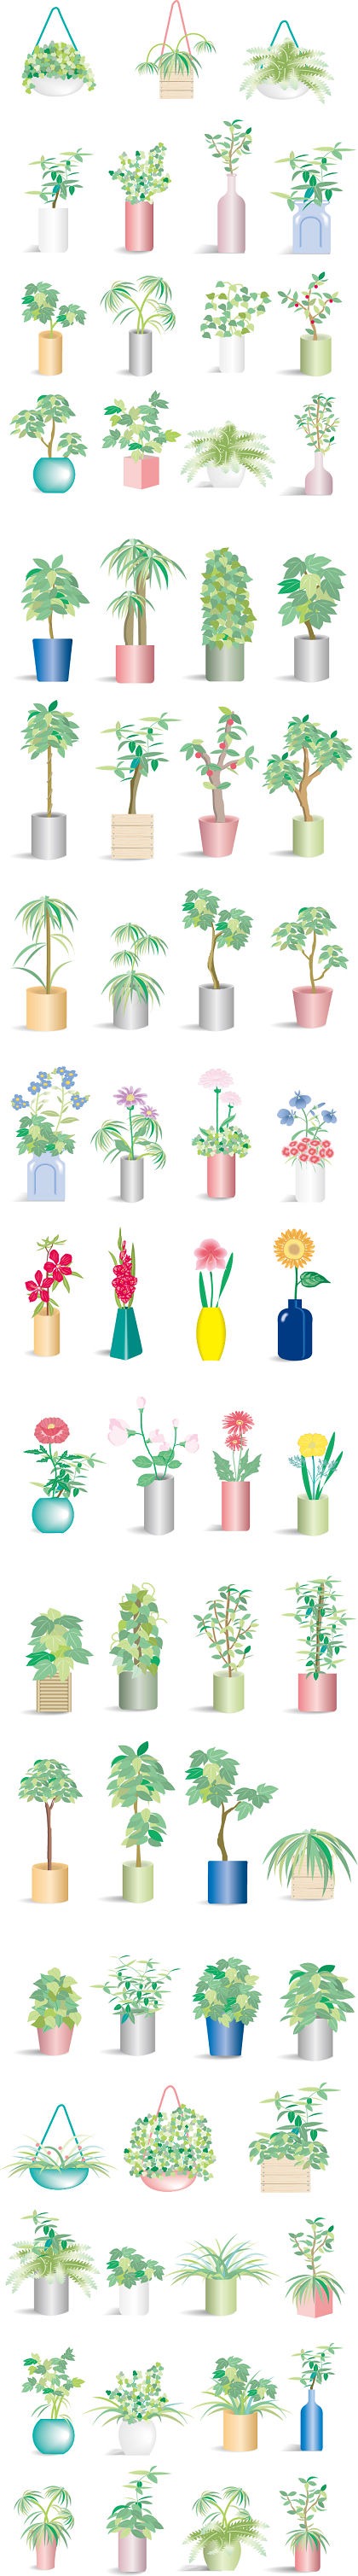 66 Potted Plants Vector